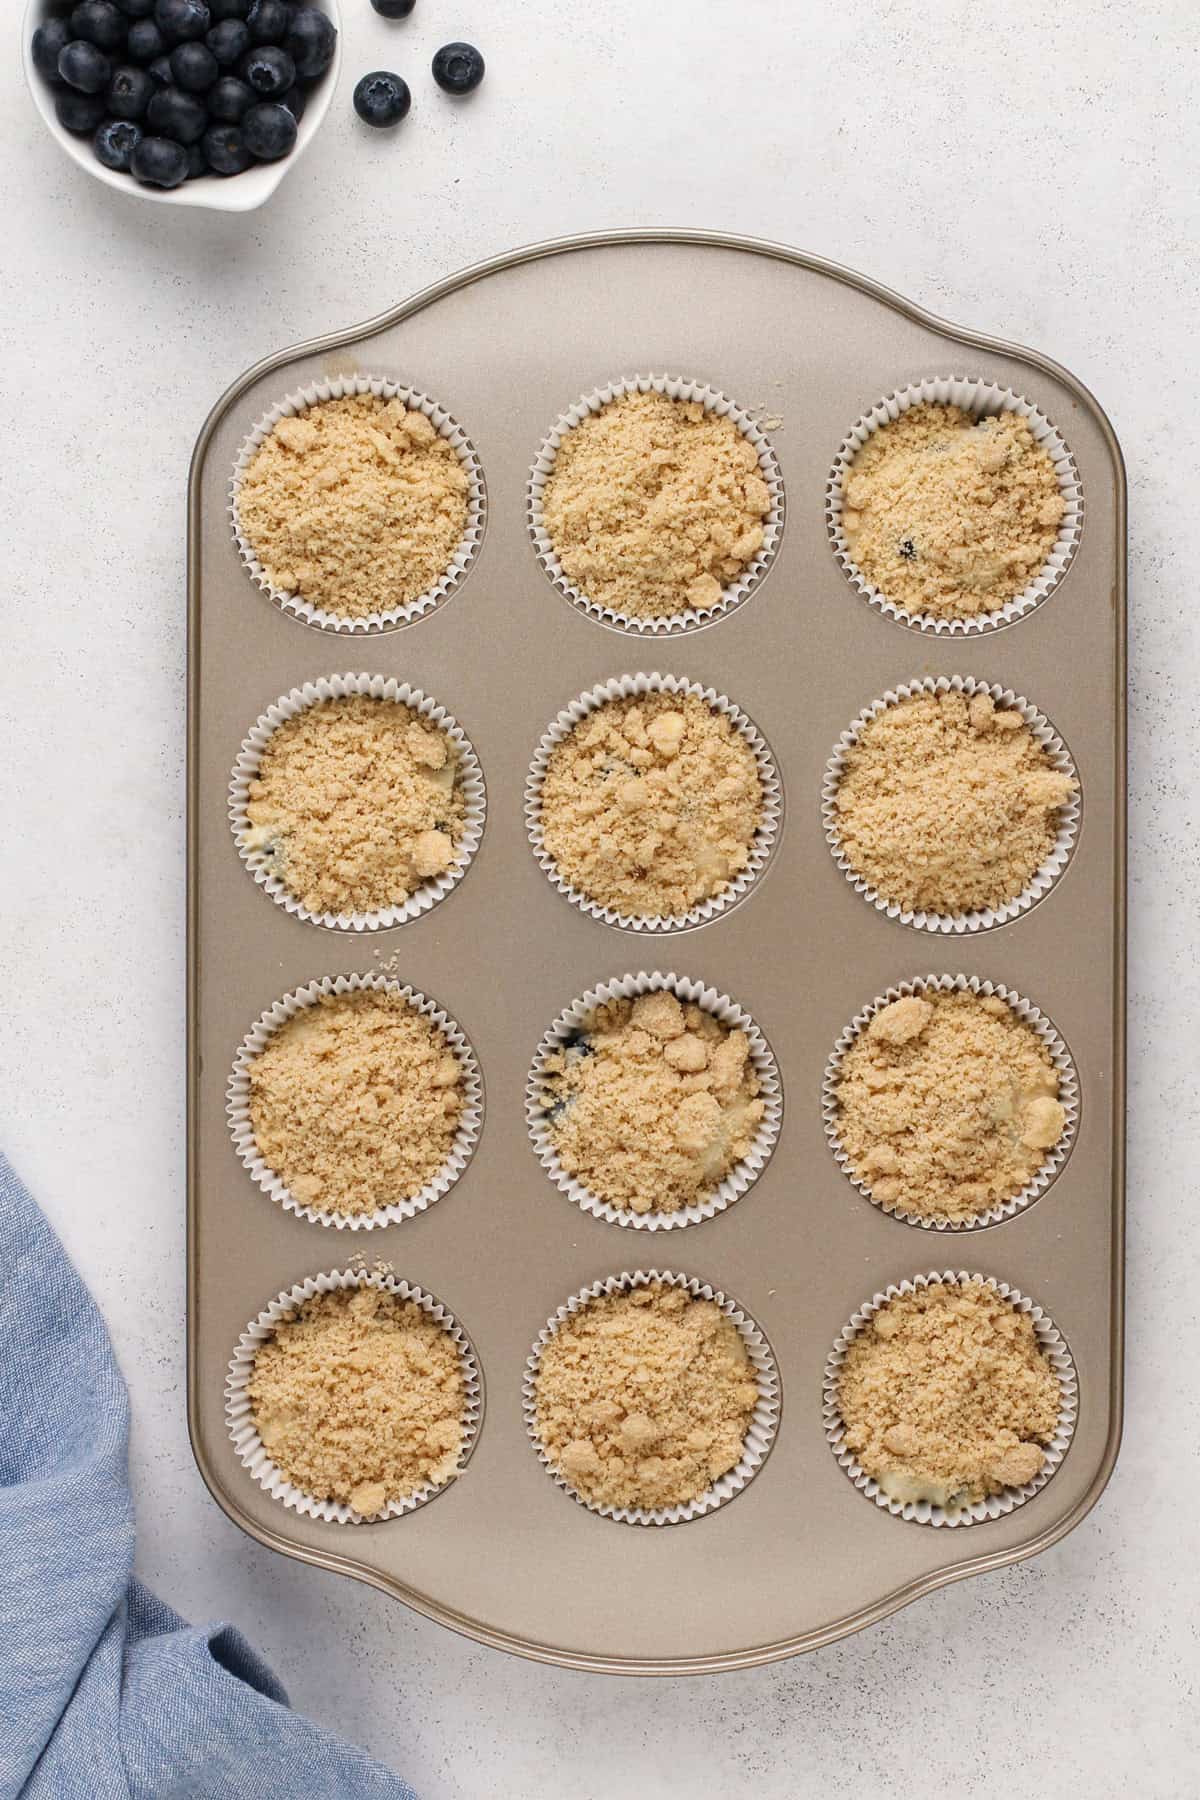 Unbaked bisquick blueberry muffins in a muffin tin, ready to go in the oven.